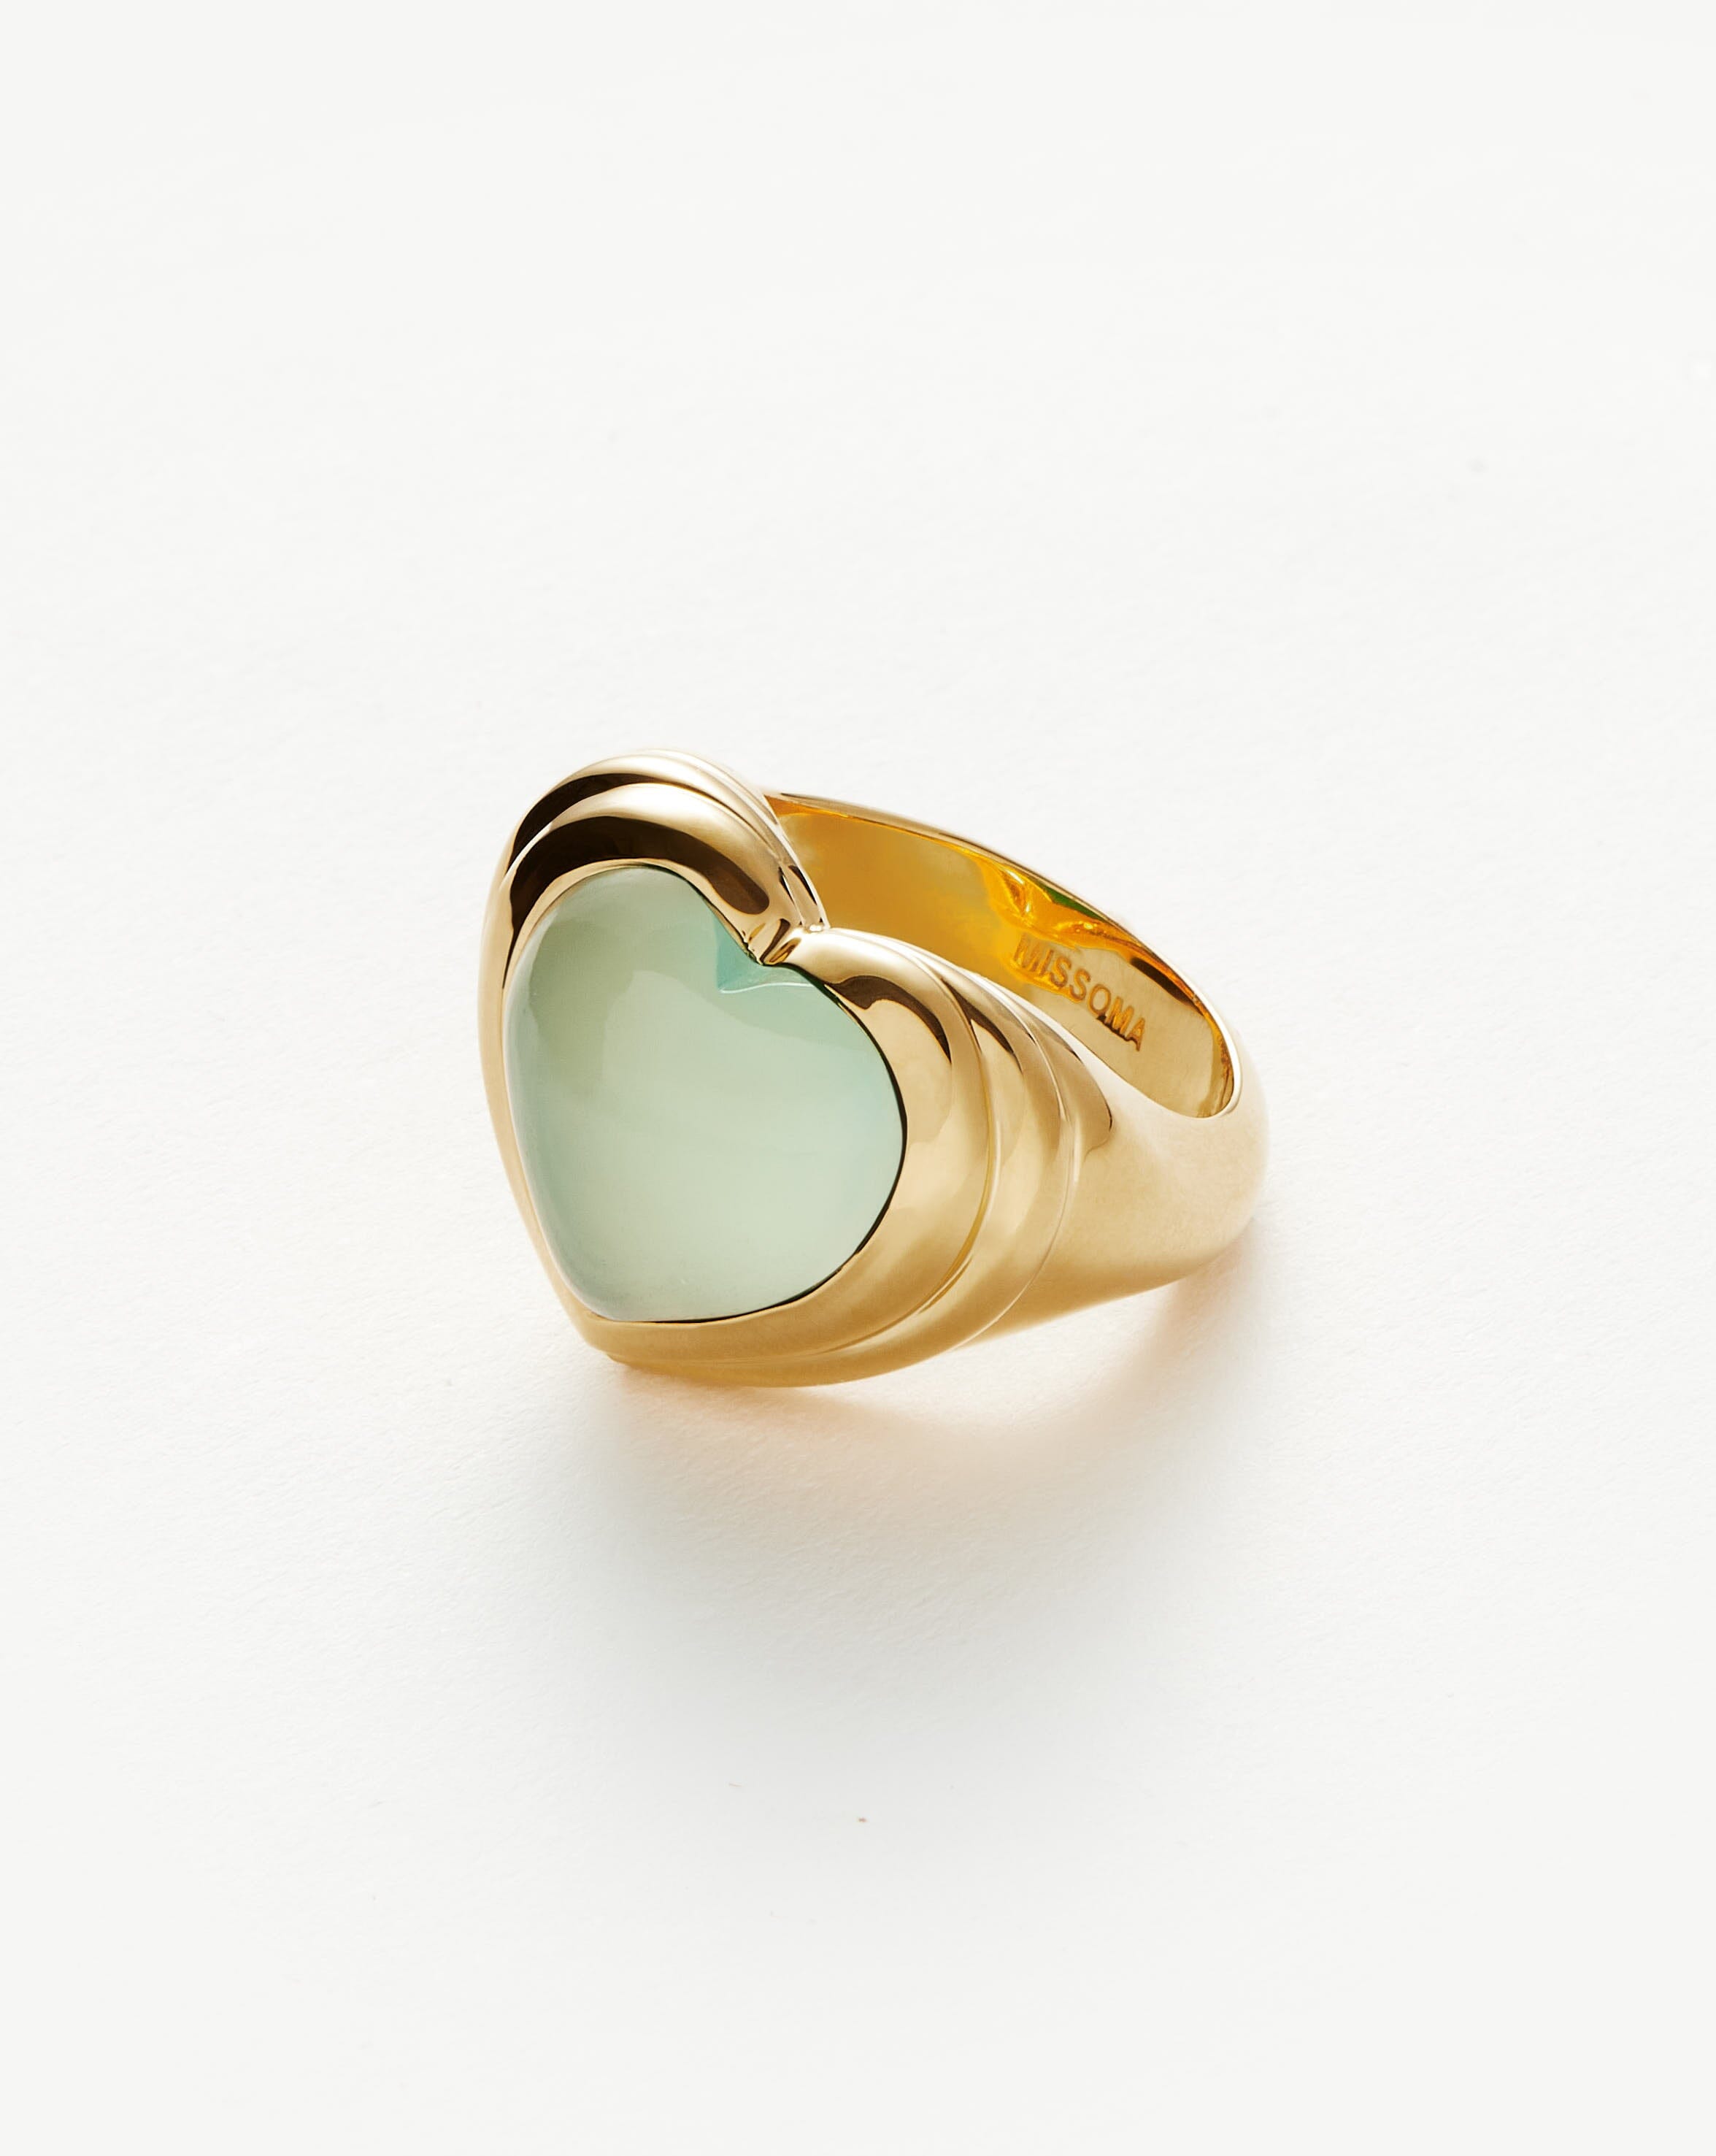 Jelly Heart Gemstone Ring | 18ct Gold Plated/Aqua Chalcedony Rings Missoma 